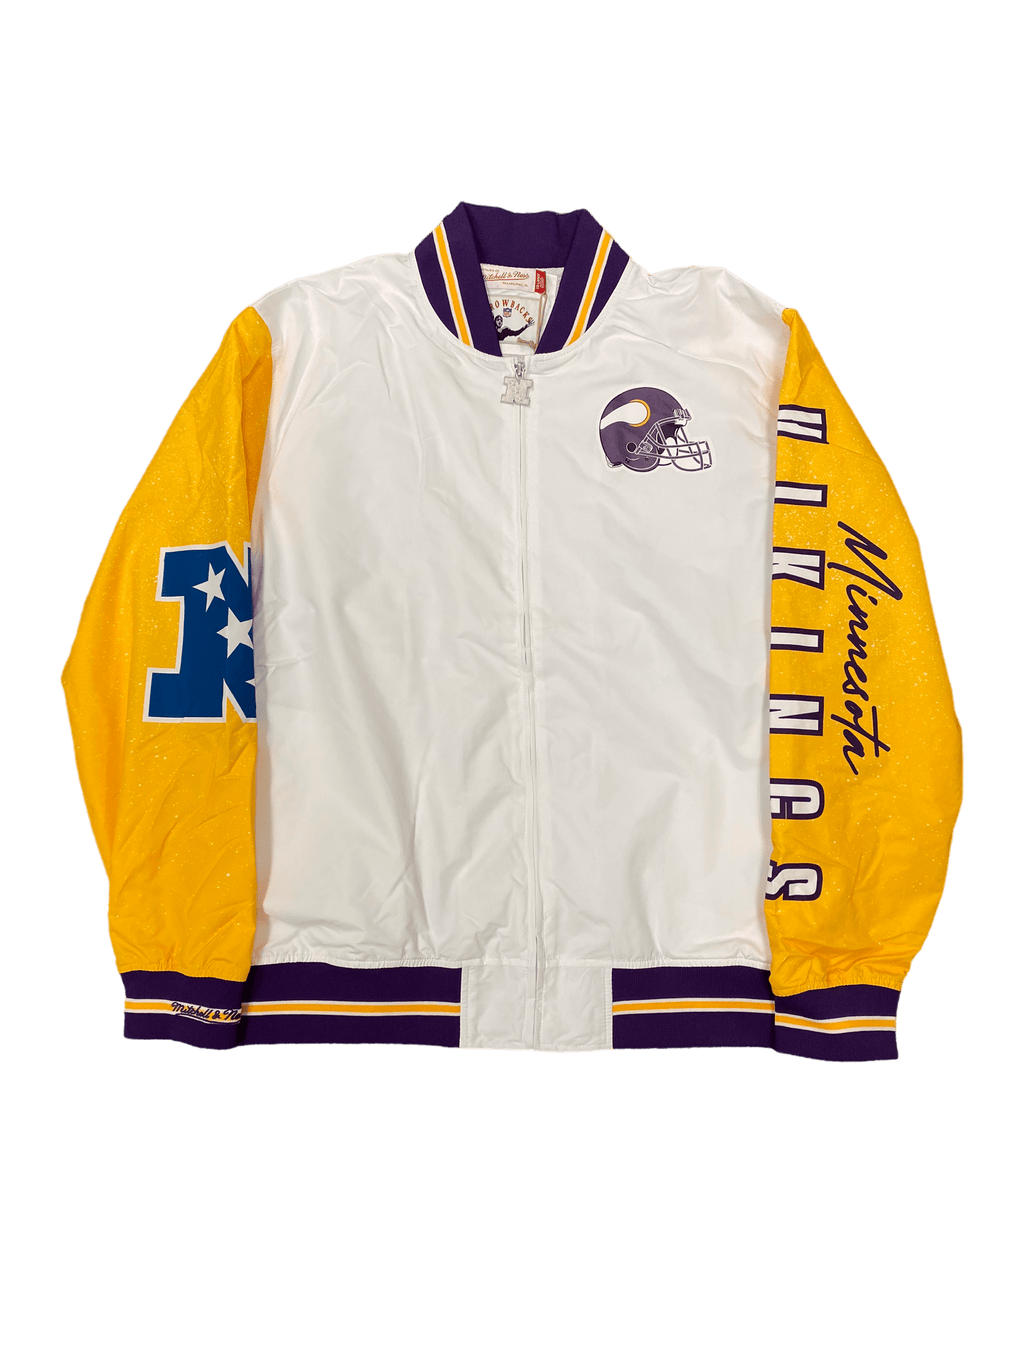 Authentic Mitchell and Ness Vintage Minnesota Timberwolves jacket